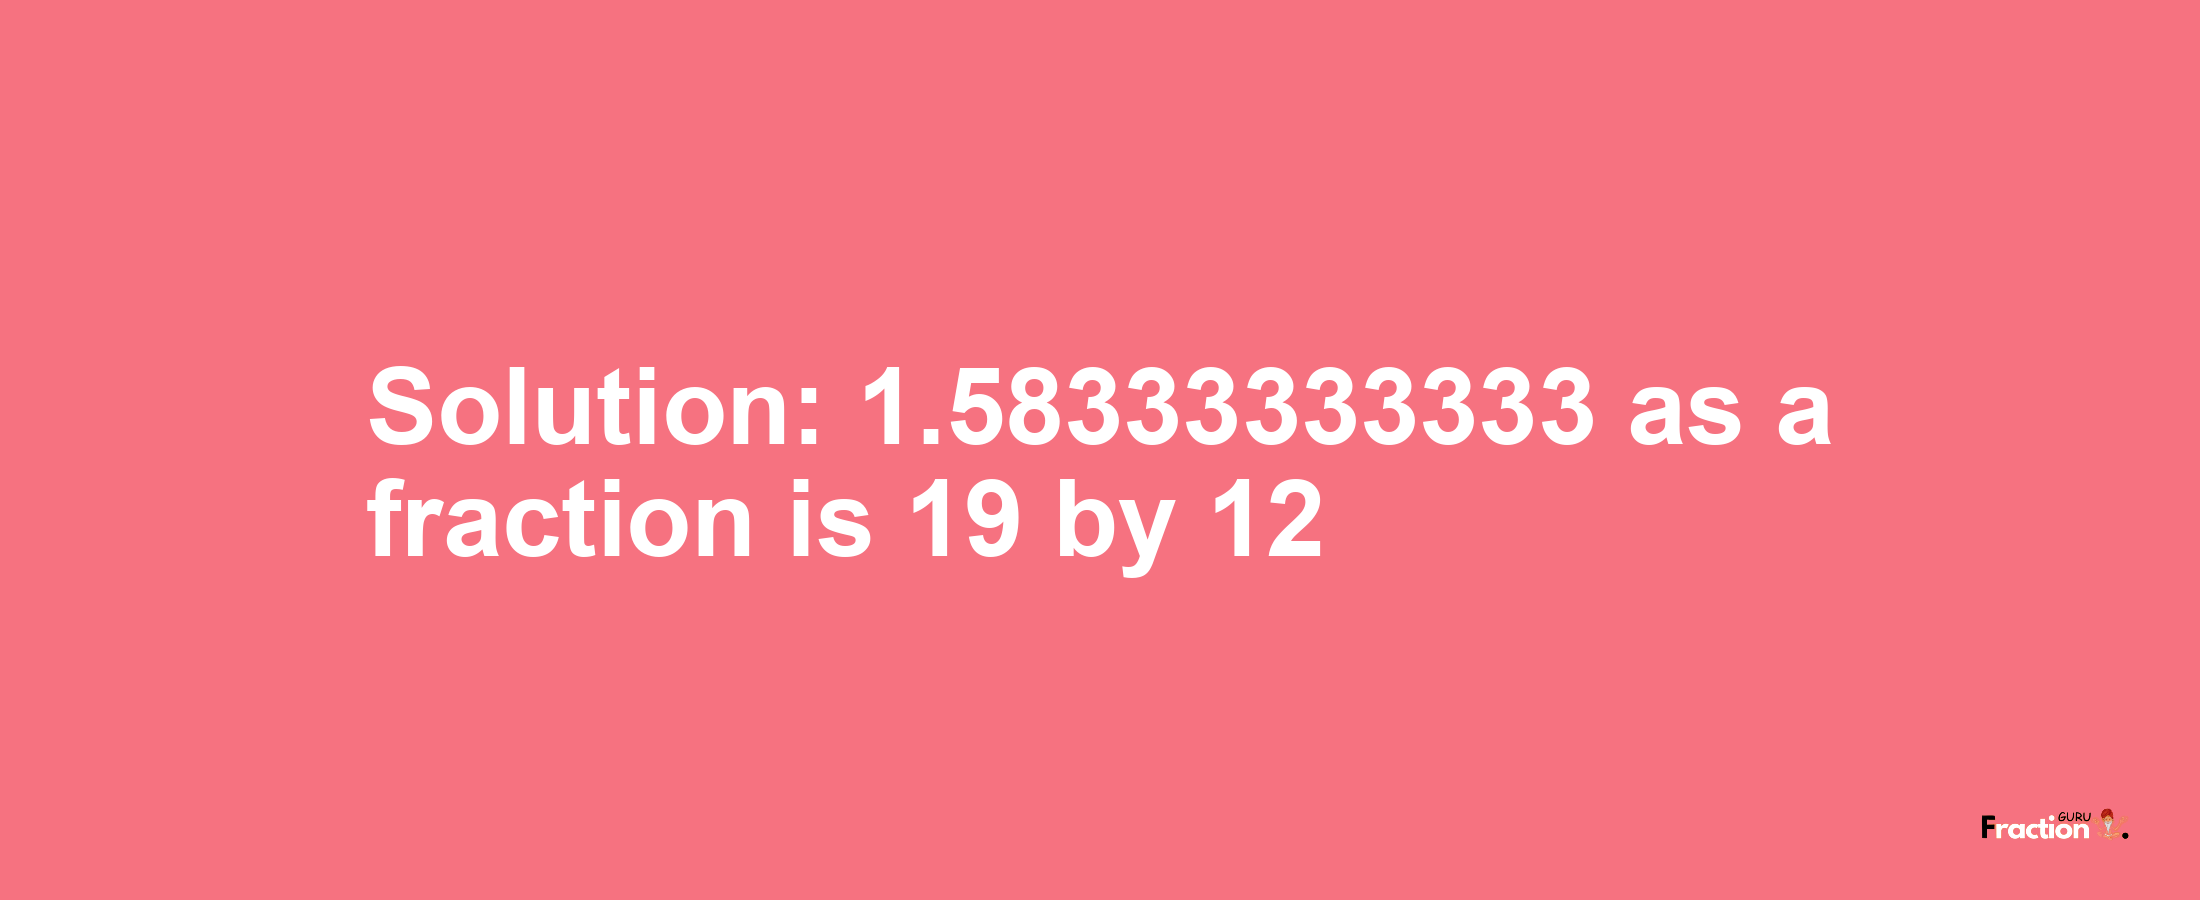 Solution:1.58333333333 as a fraction is 19/12